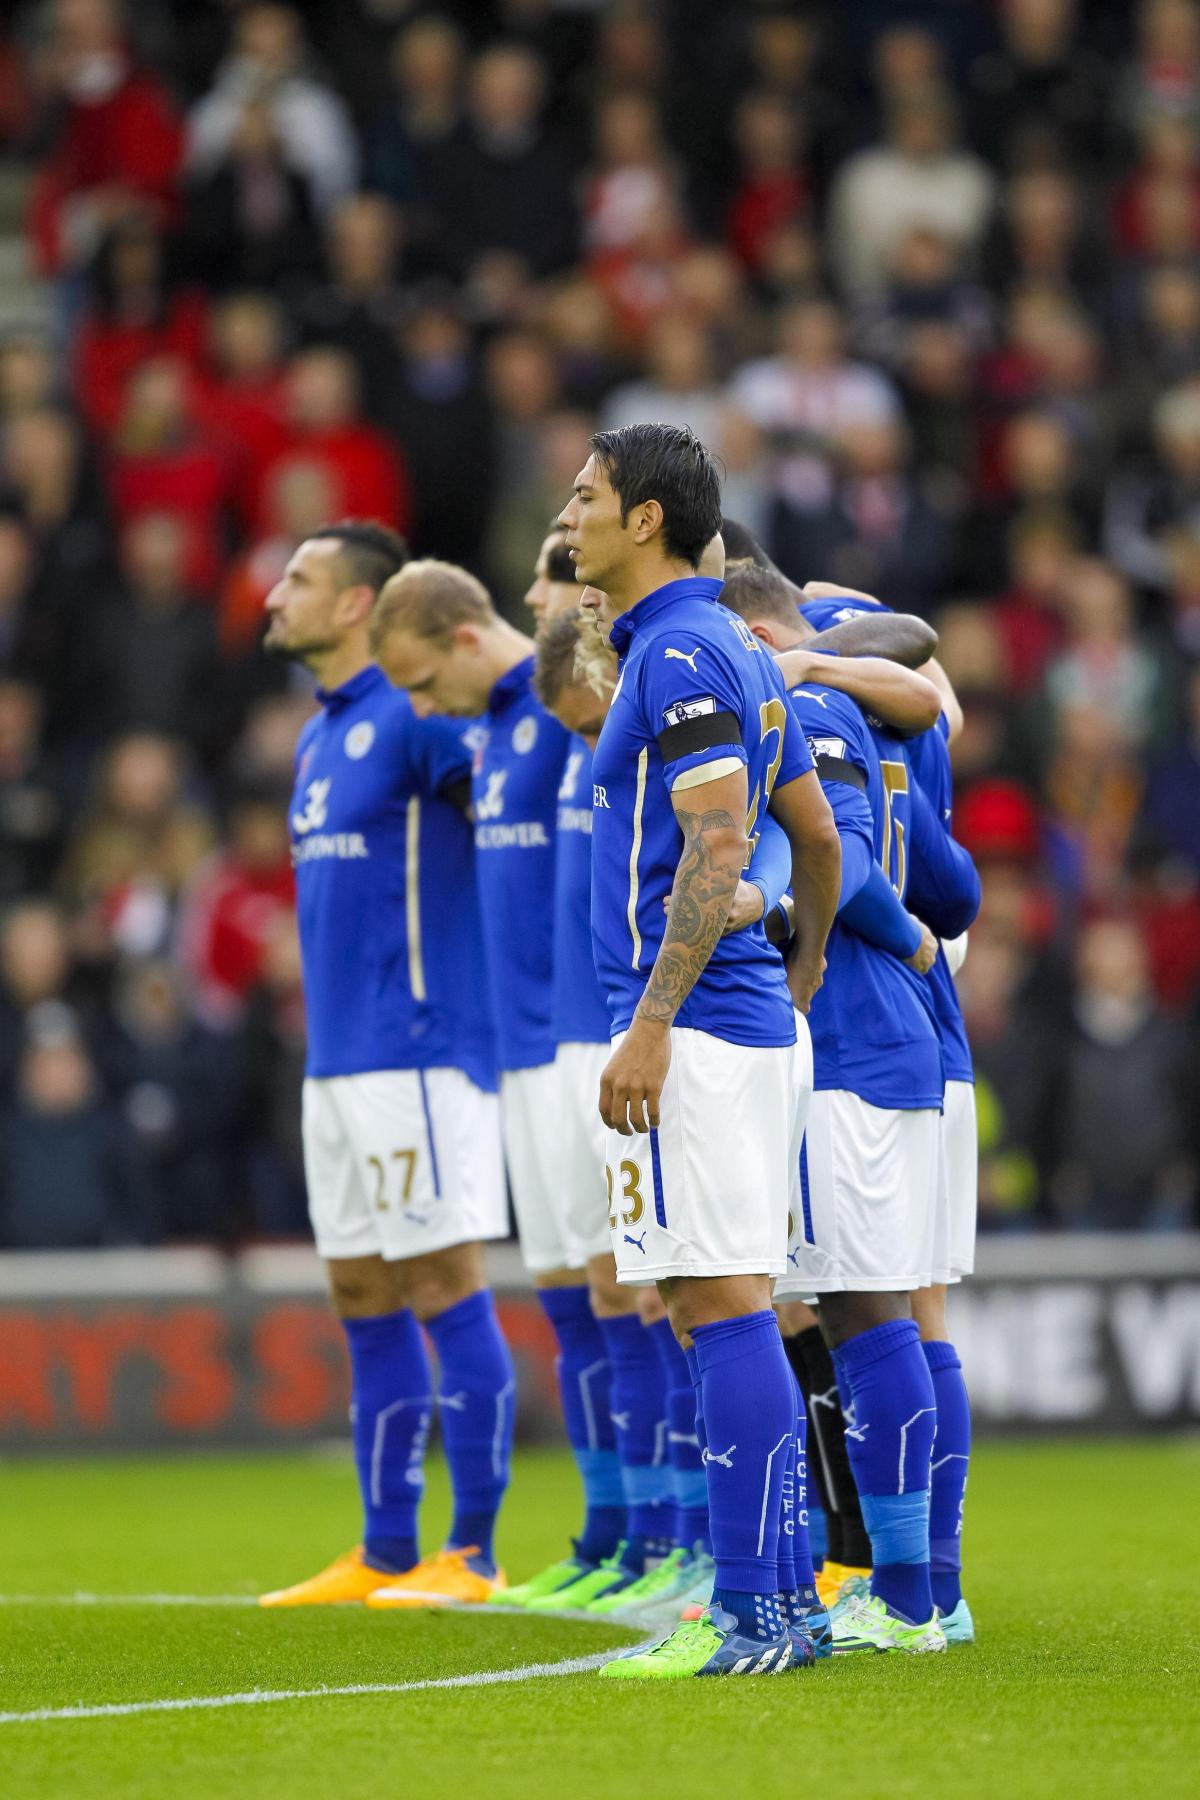 Image from the Saint's v Leicester match at St Mary's Stadium. The unauthorised downloading, editing, copying or distribution of this image is strictly prohibited.